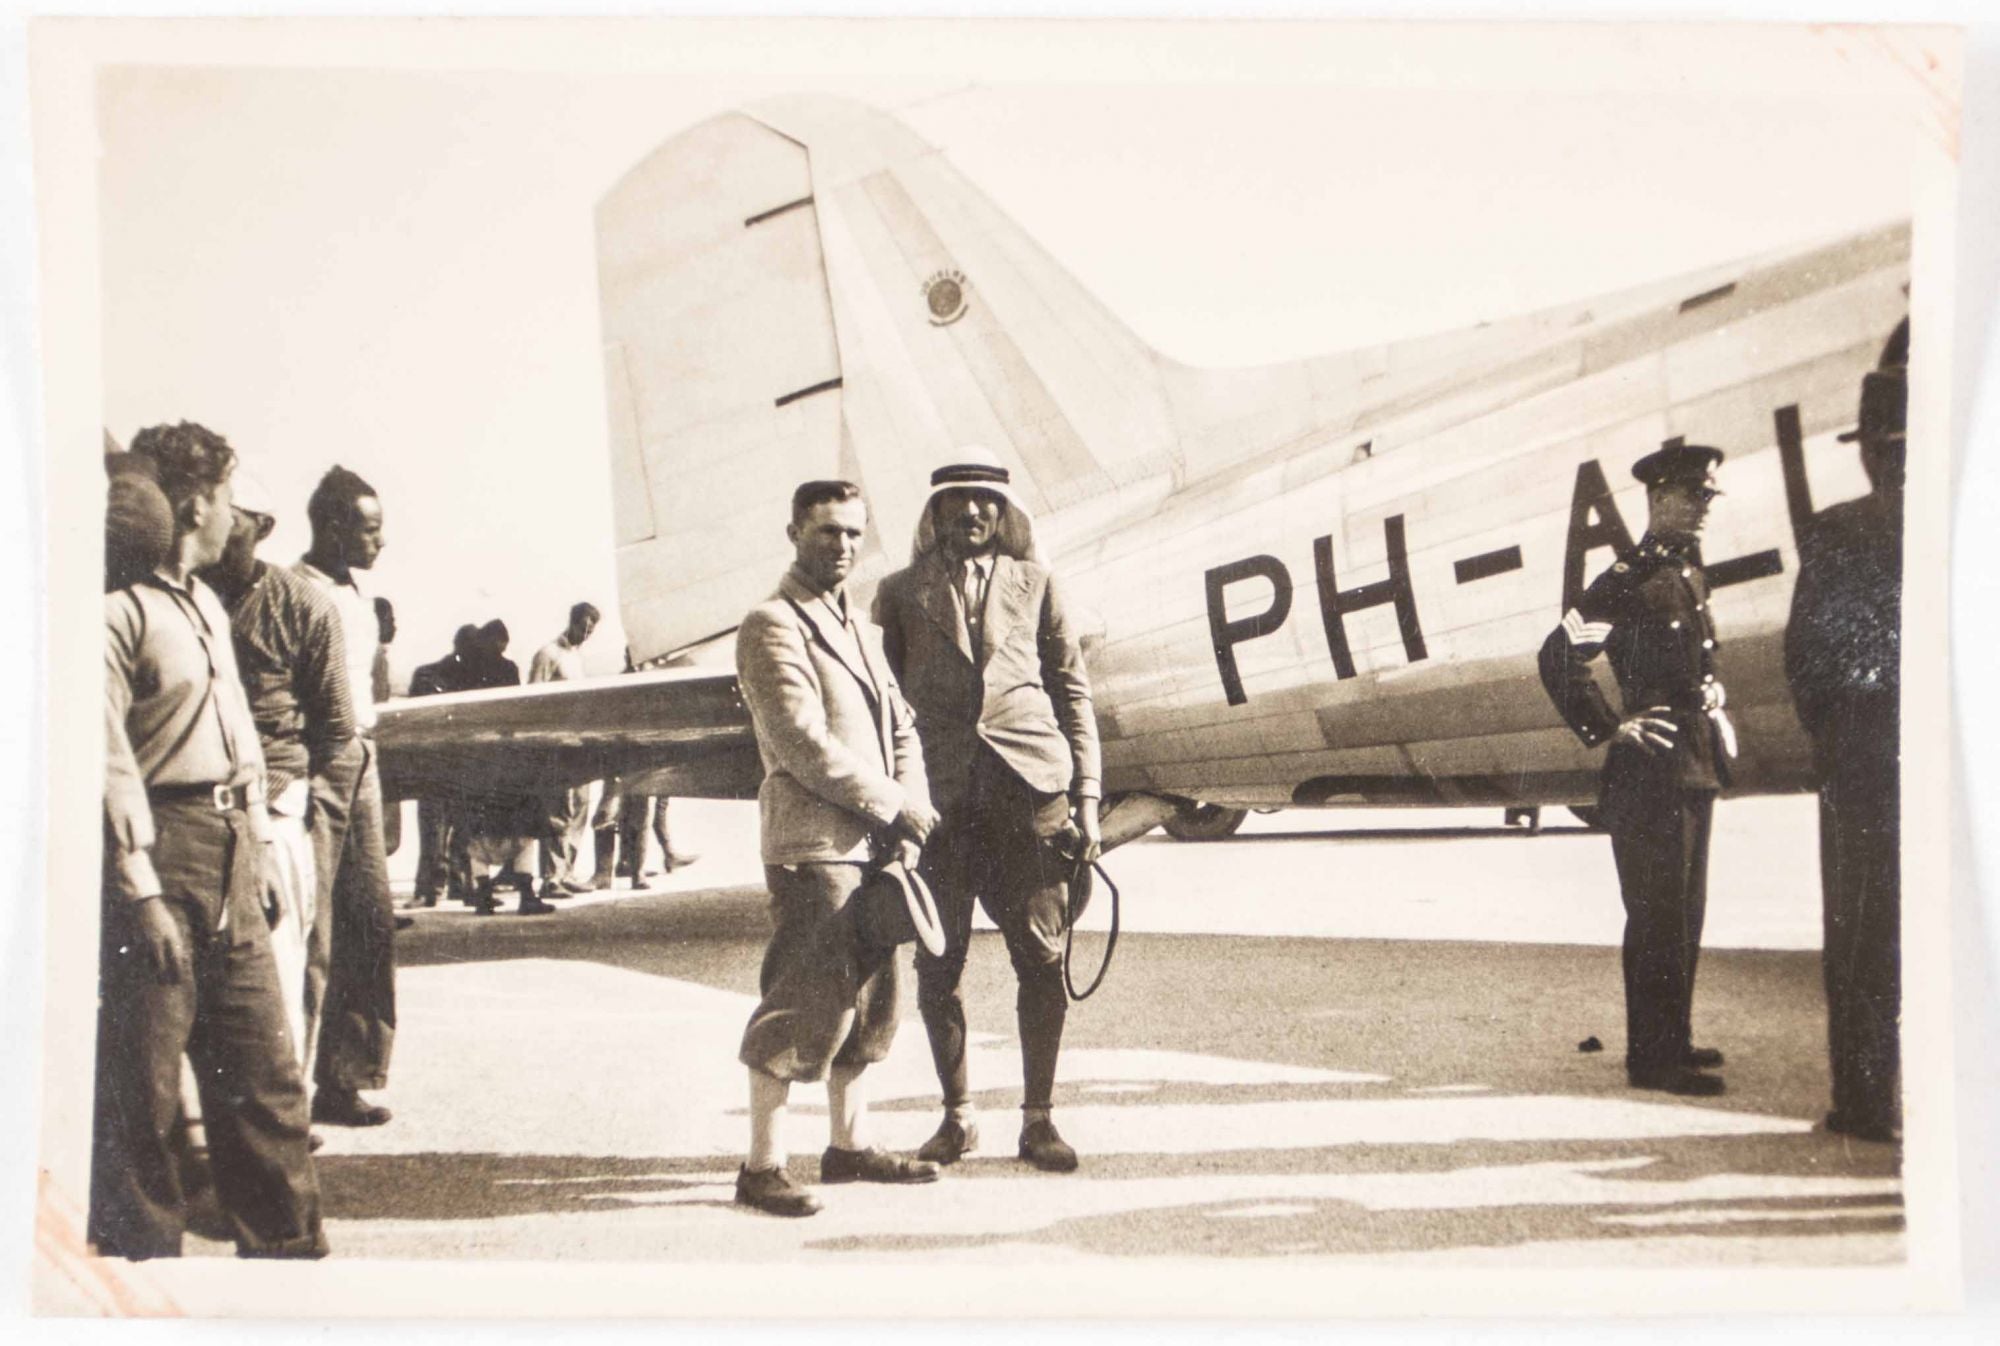 A Collection of Photographs of the Lod Airport Ben-Gurion Airport from the  British Mandate Period and Early History of The State of Israel 25 images